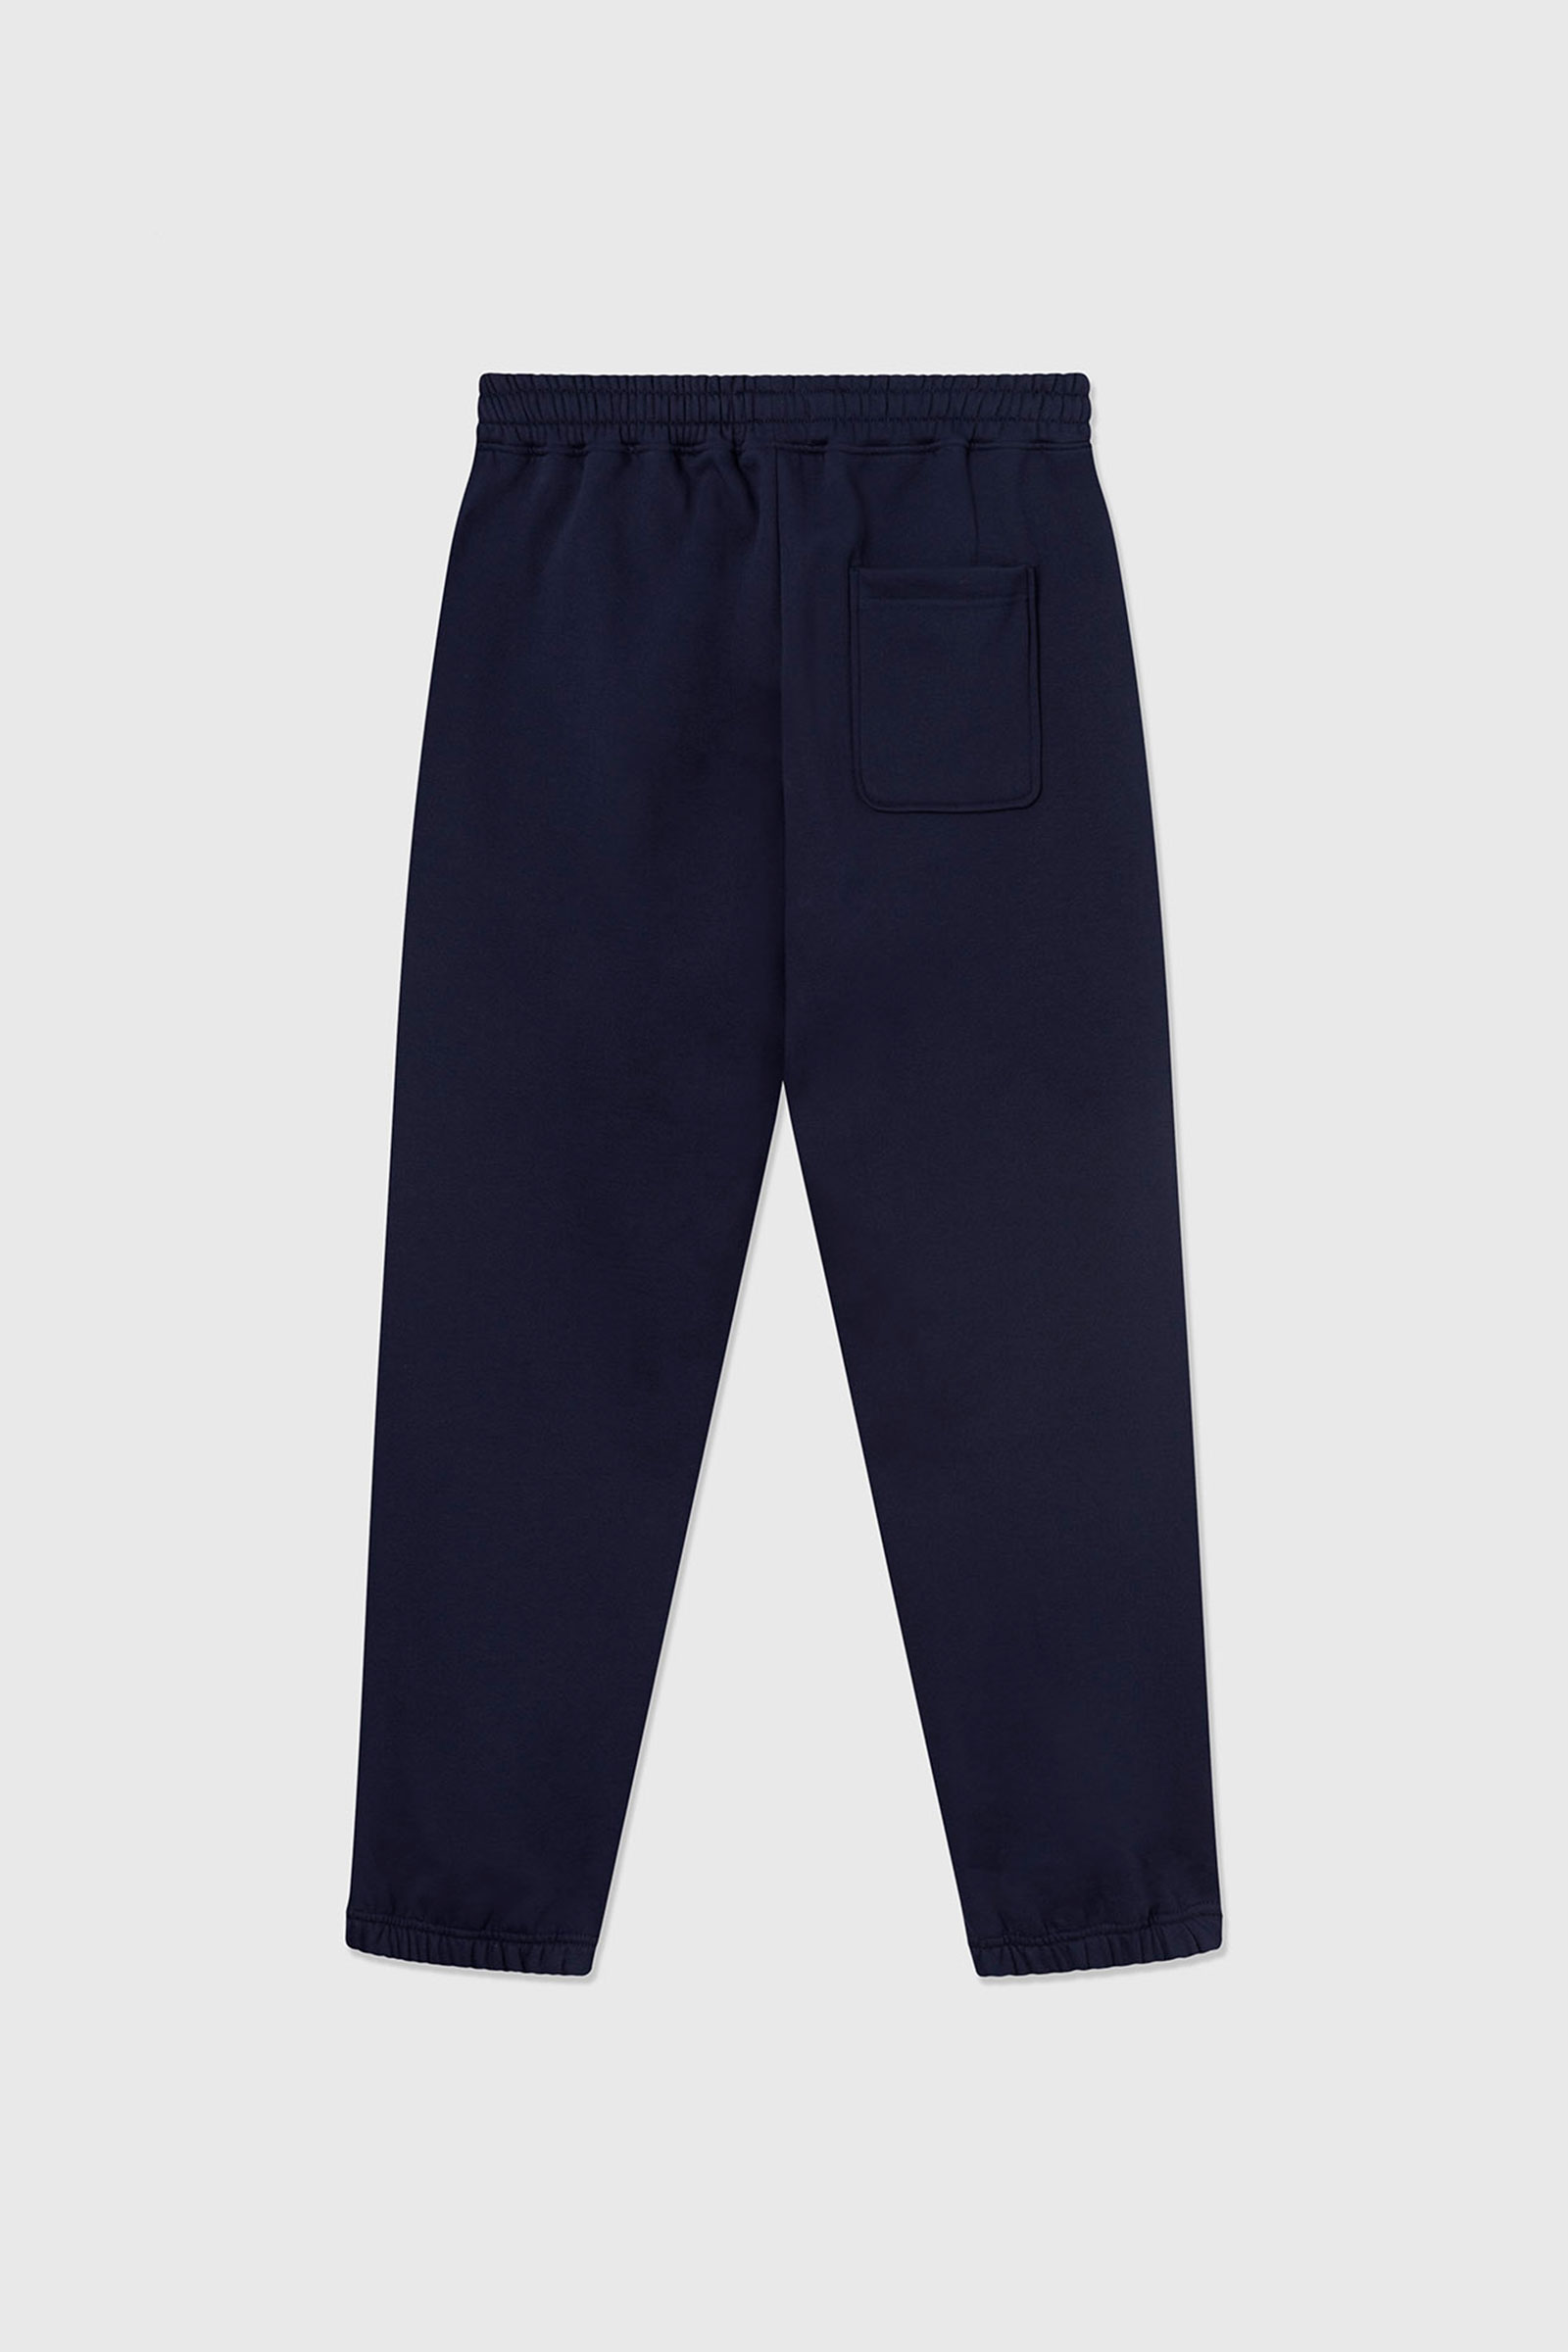 Double A by Wood Wood Cal joggers Navy | WoodWood.com